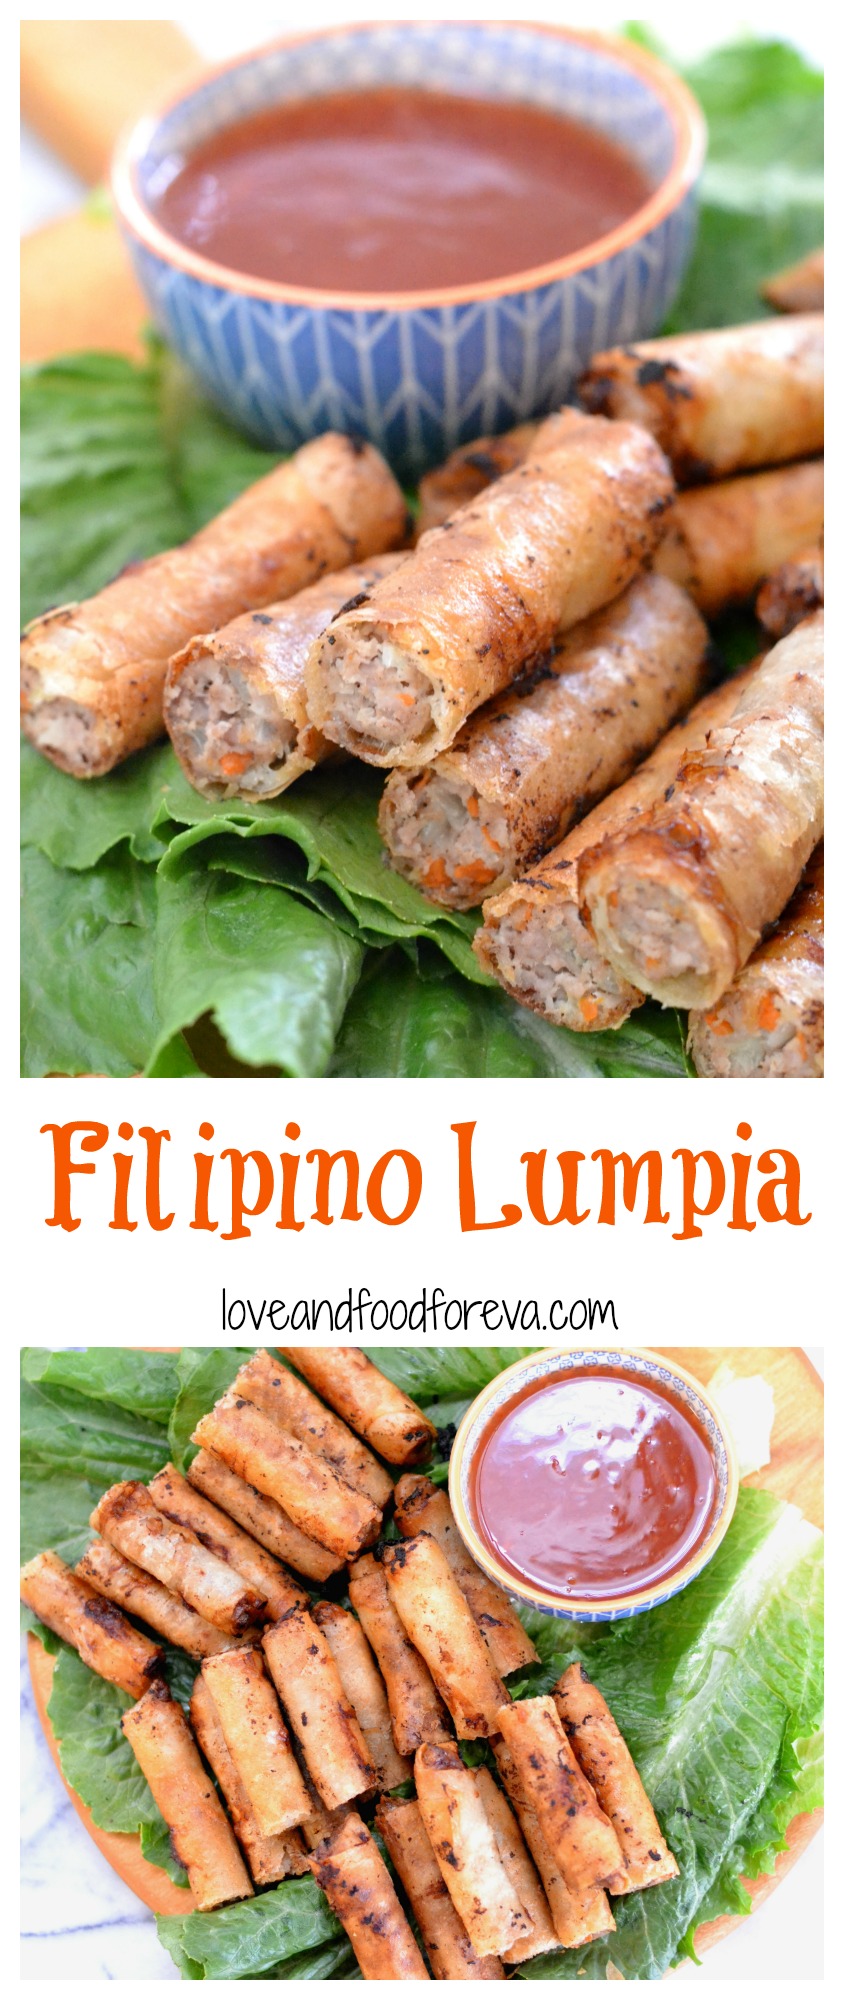 Filipino Lumpia - this simple, classic recipe will keep you coming back over and over!